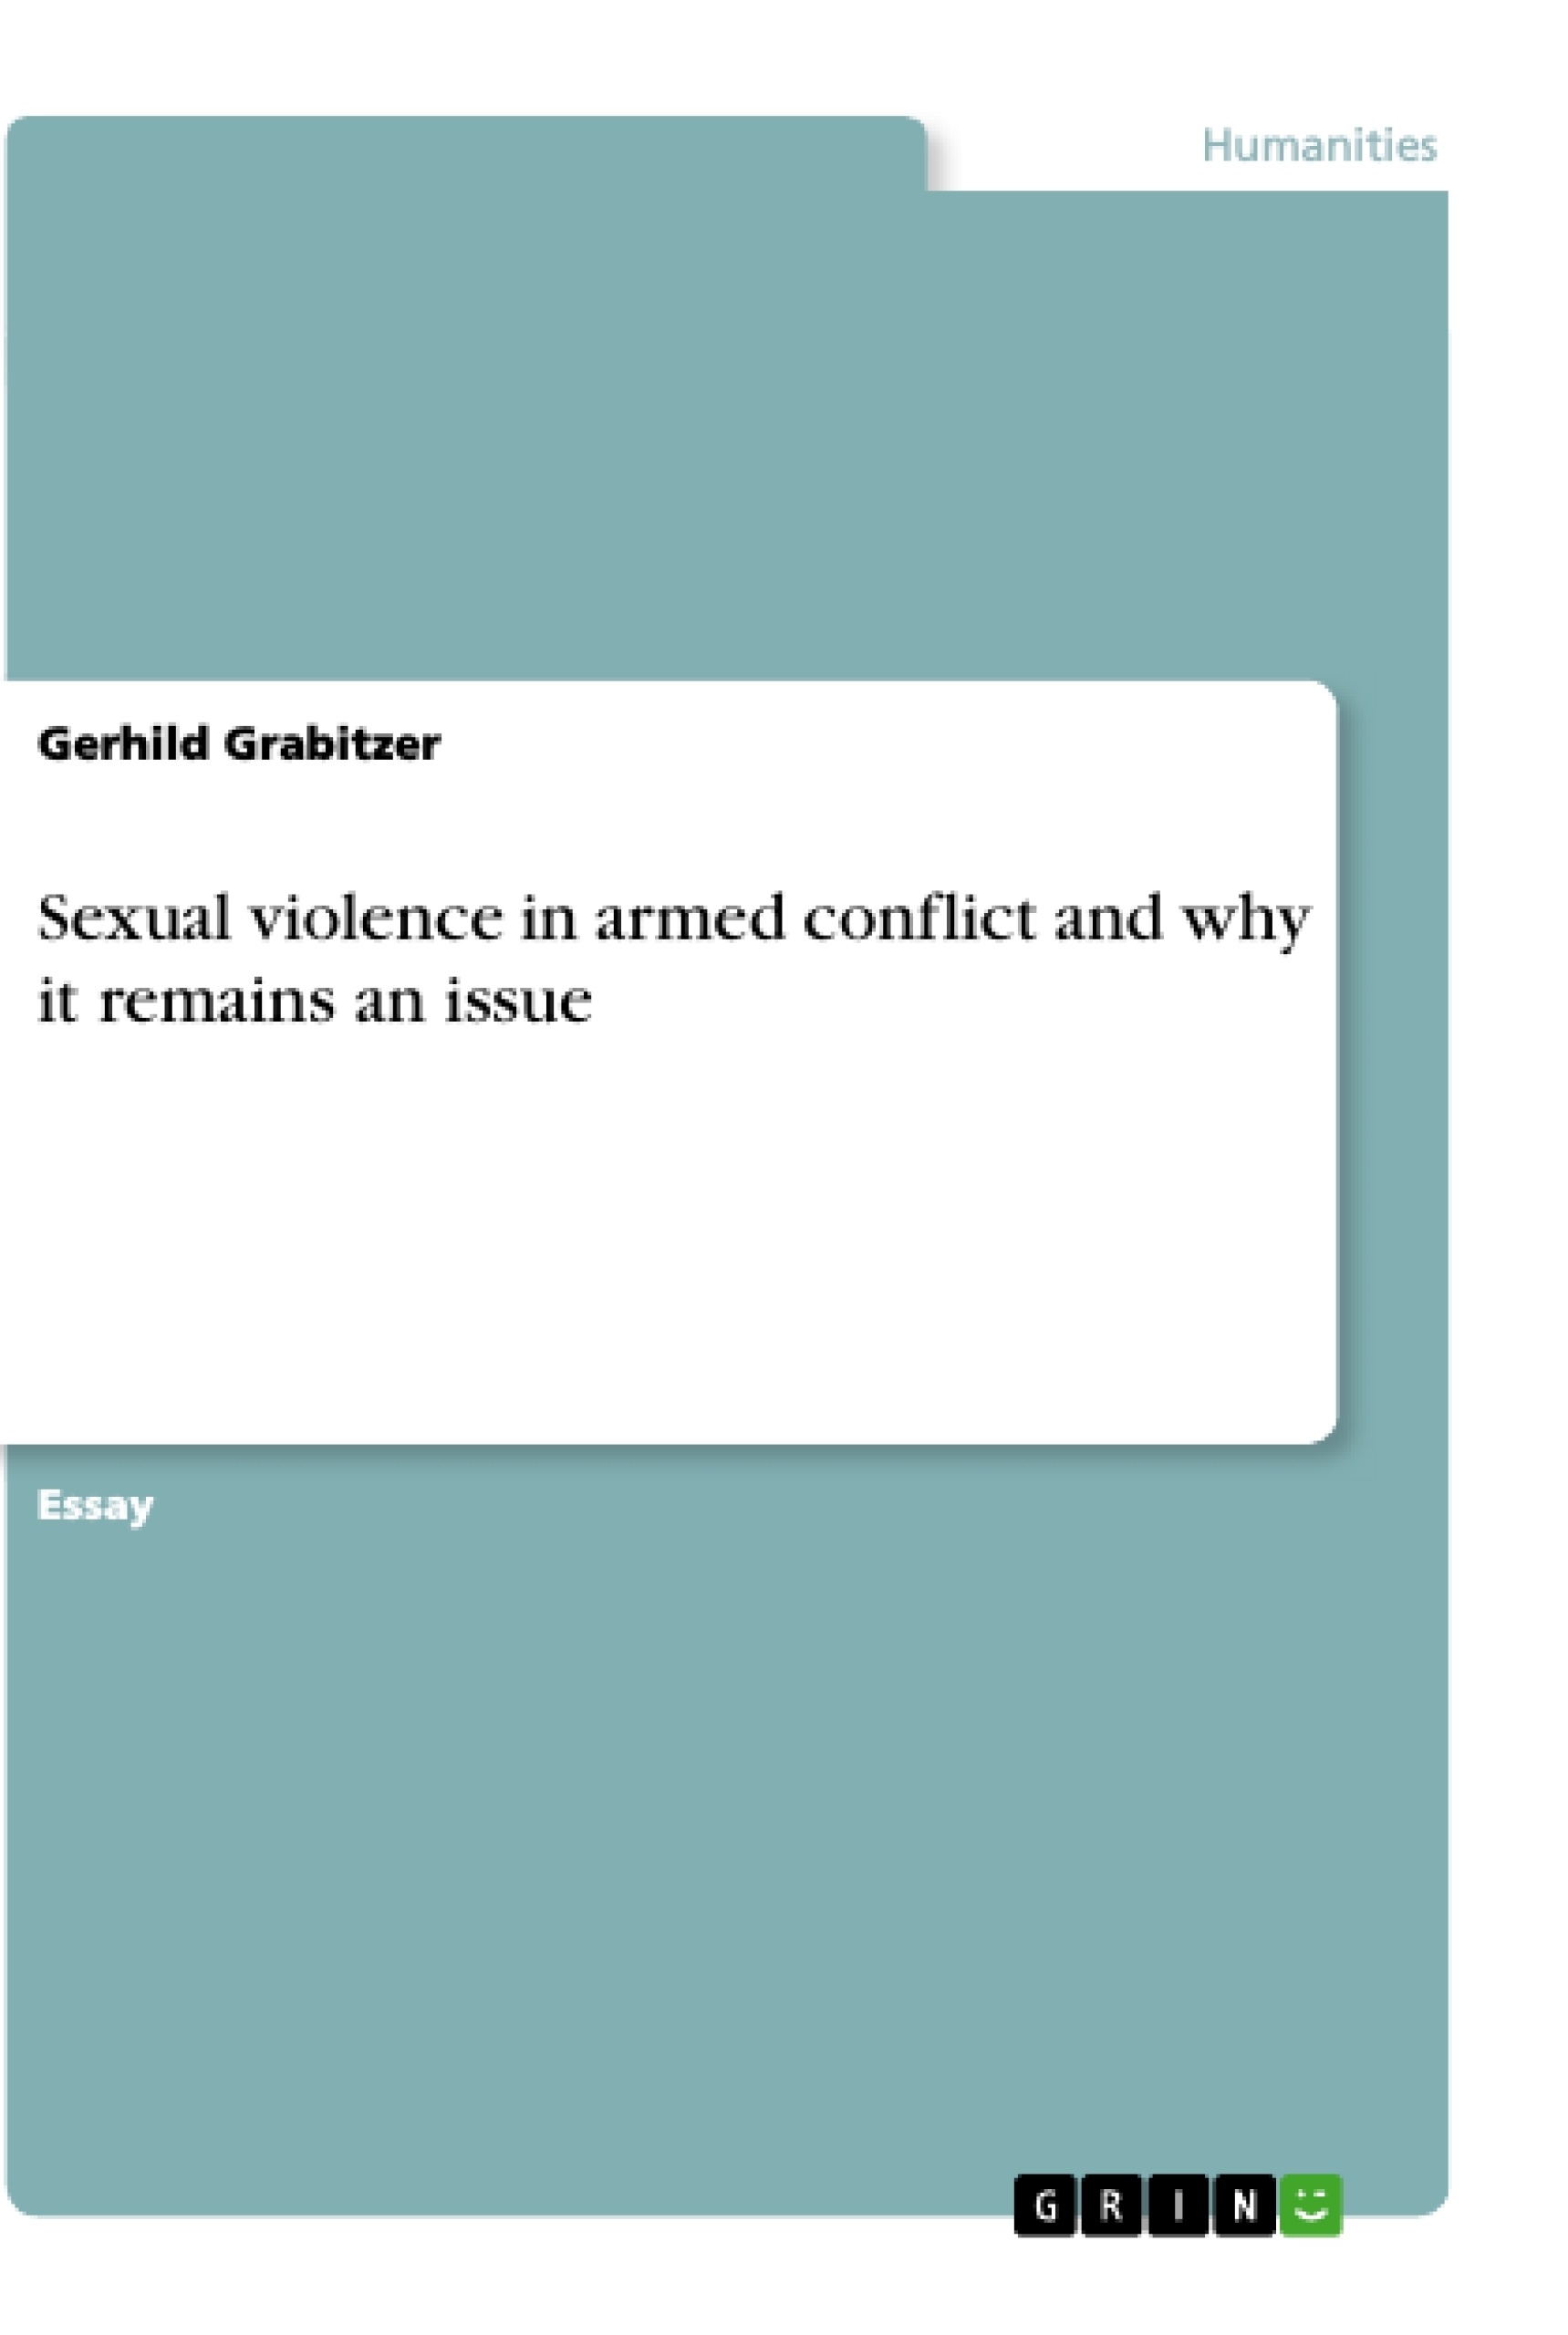 Título: Sexual violence in armed conflict and why it remains an issue